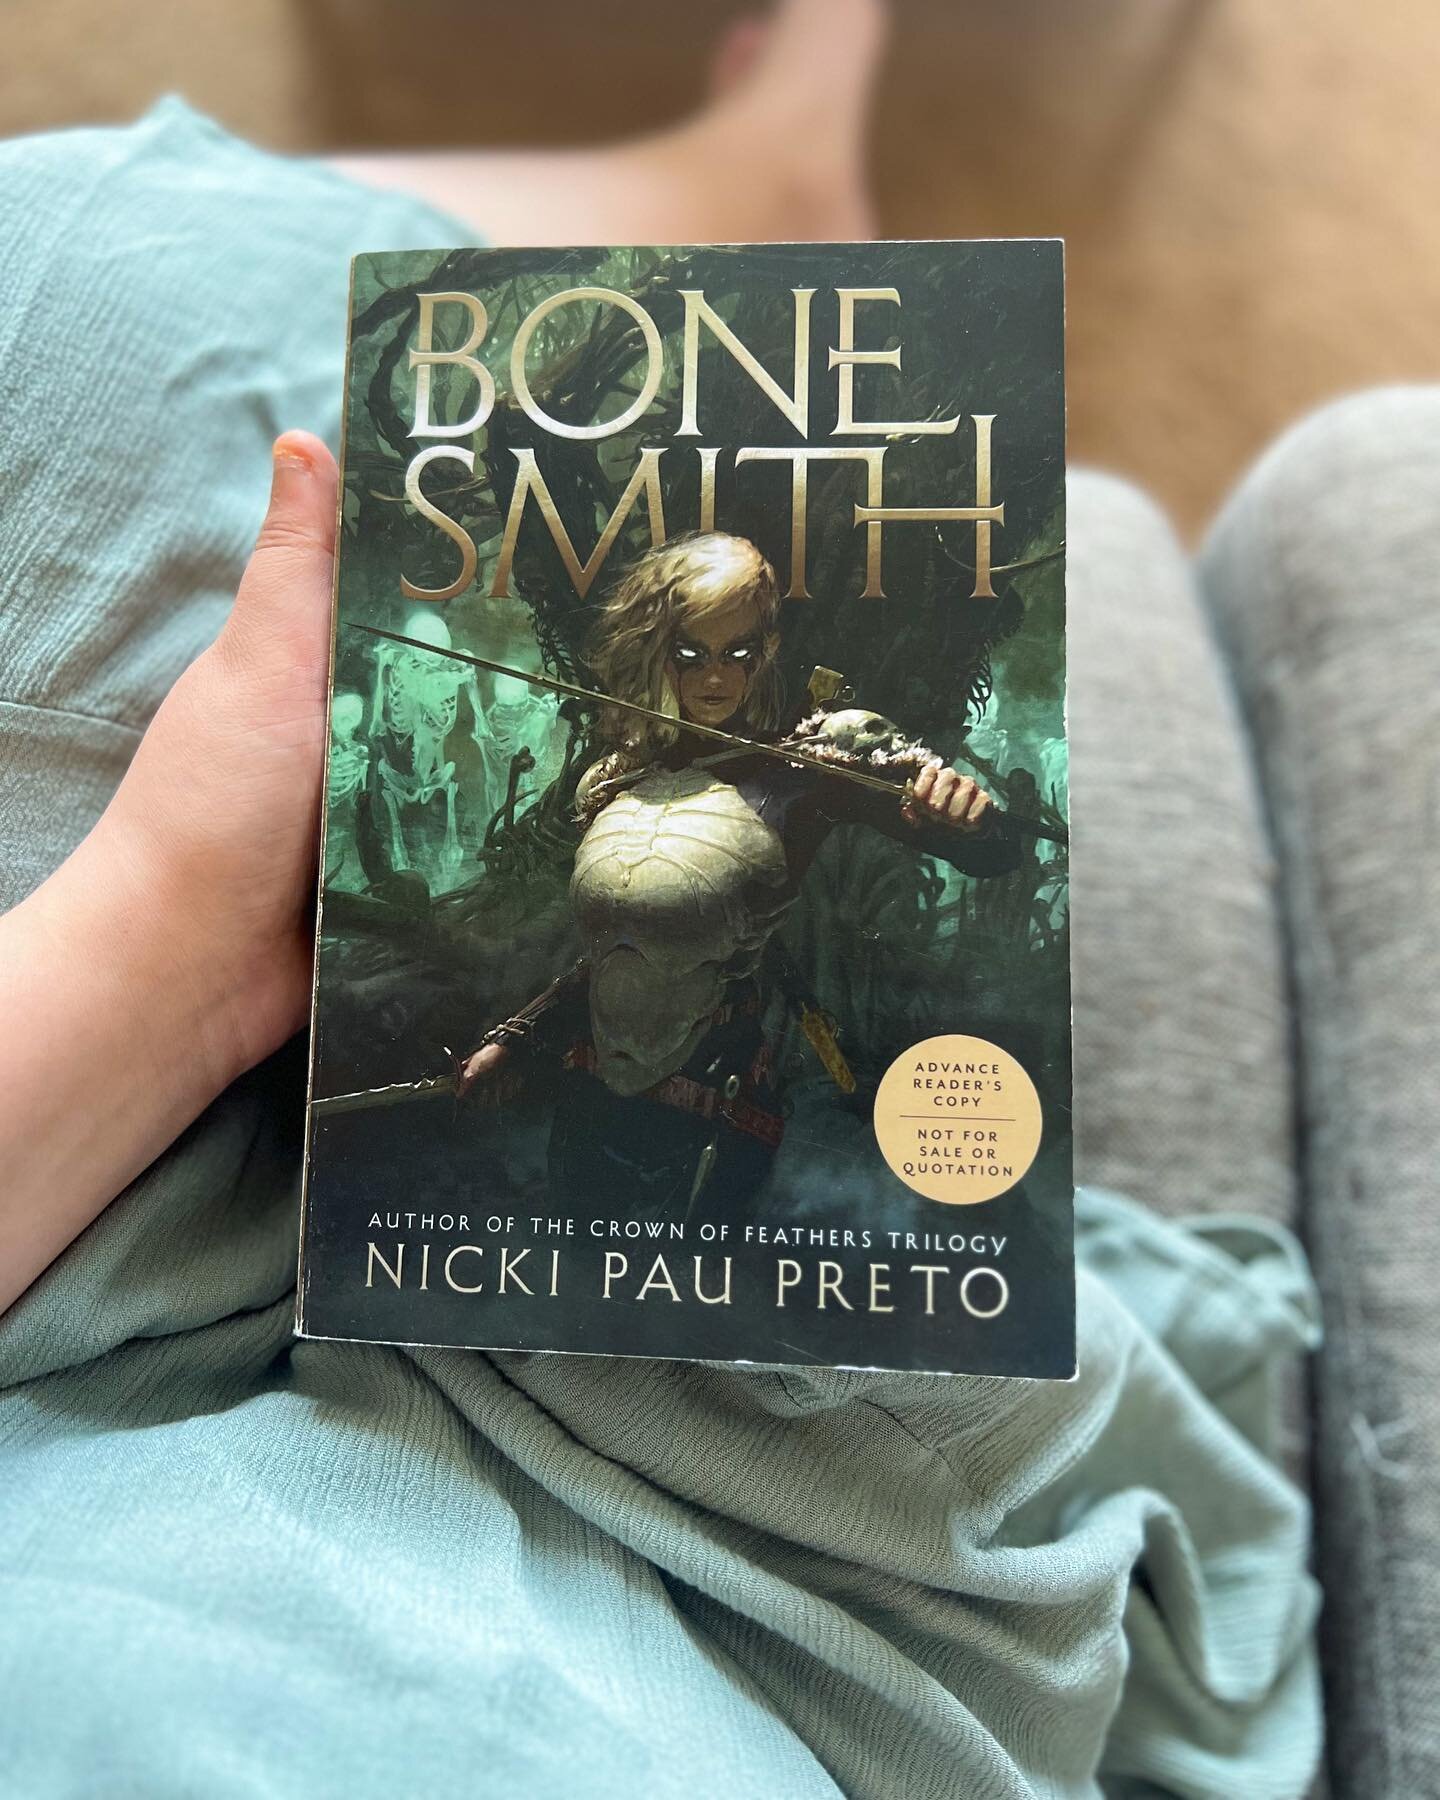 The perfect vacation read 💚💀 

Bonesmith is on sale July 25! If you&rsquo;re in Toronto, @nickipaupreto is hosting a launch event in Barrie the Sunday prior to on sale! Check her page for details.

#Bonesmith #NickiPauPreto #ReadingRiders #AmReadin